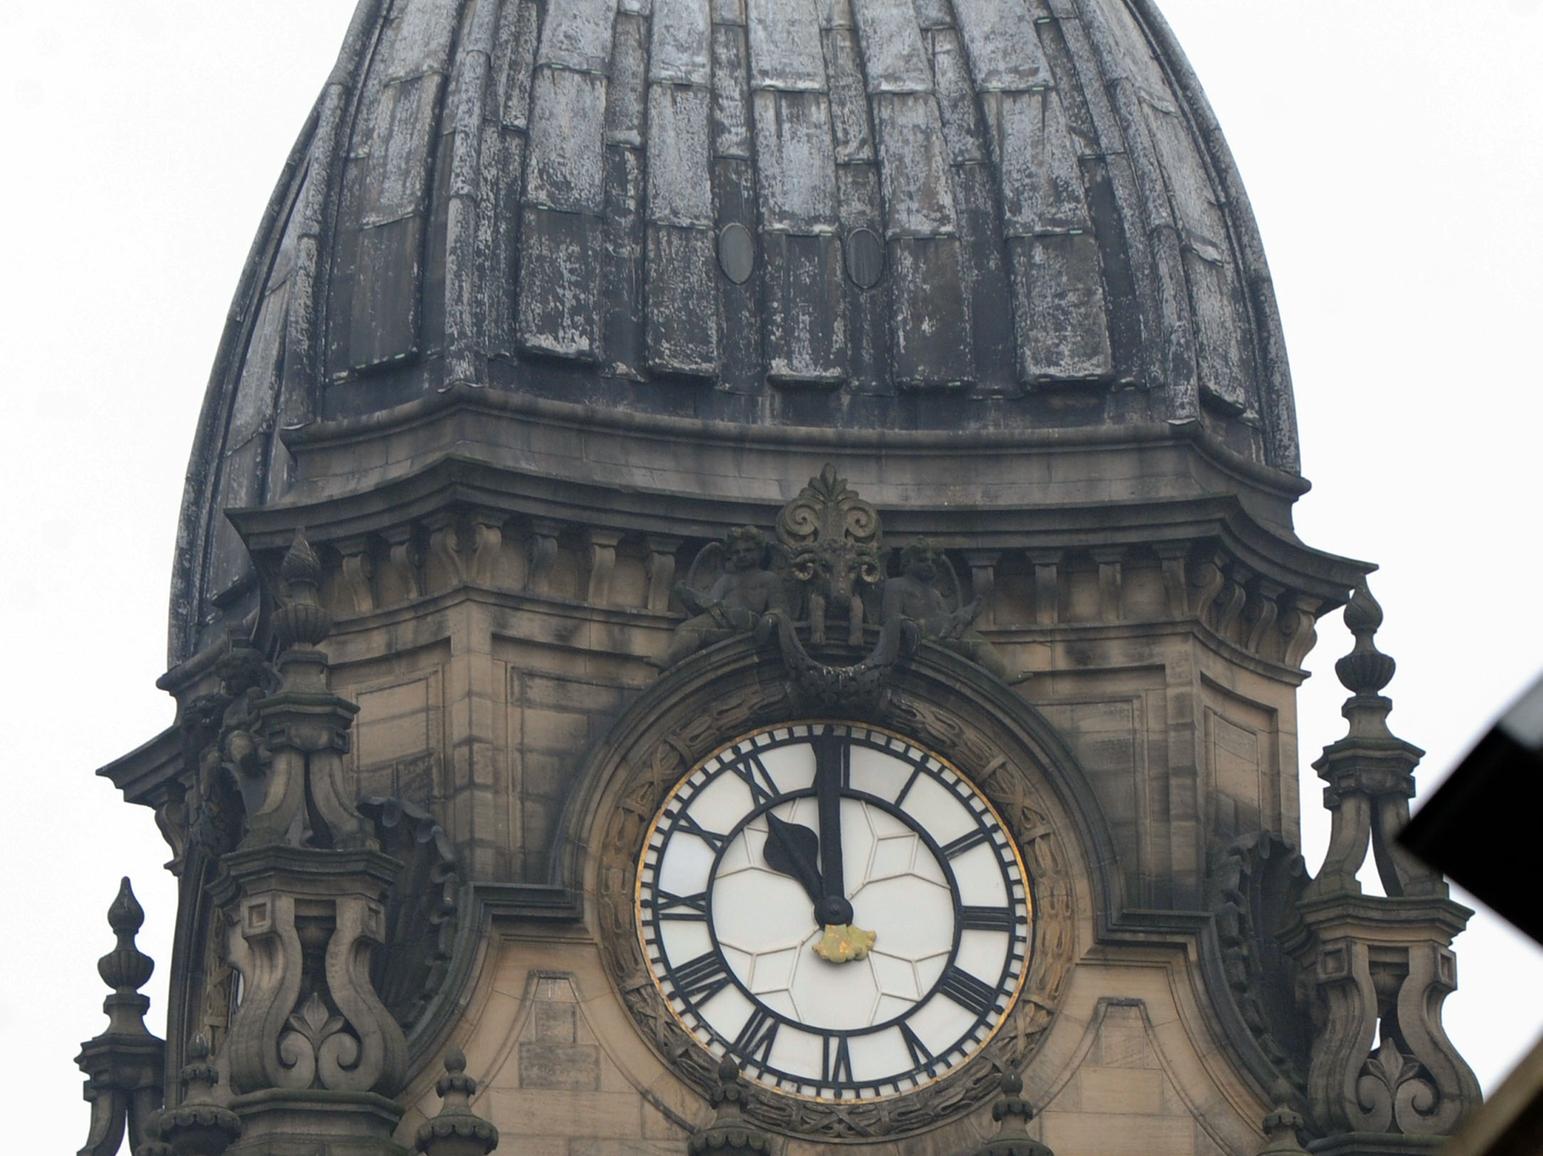 Leeds Town Hall is said to have its very own ghost - Mary Blythe, who threw herself from the clock tower in 1876. According to the story, the clock doesn't strike at midnight so as not to wake her up.